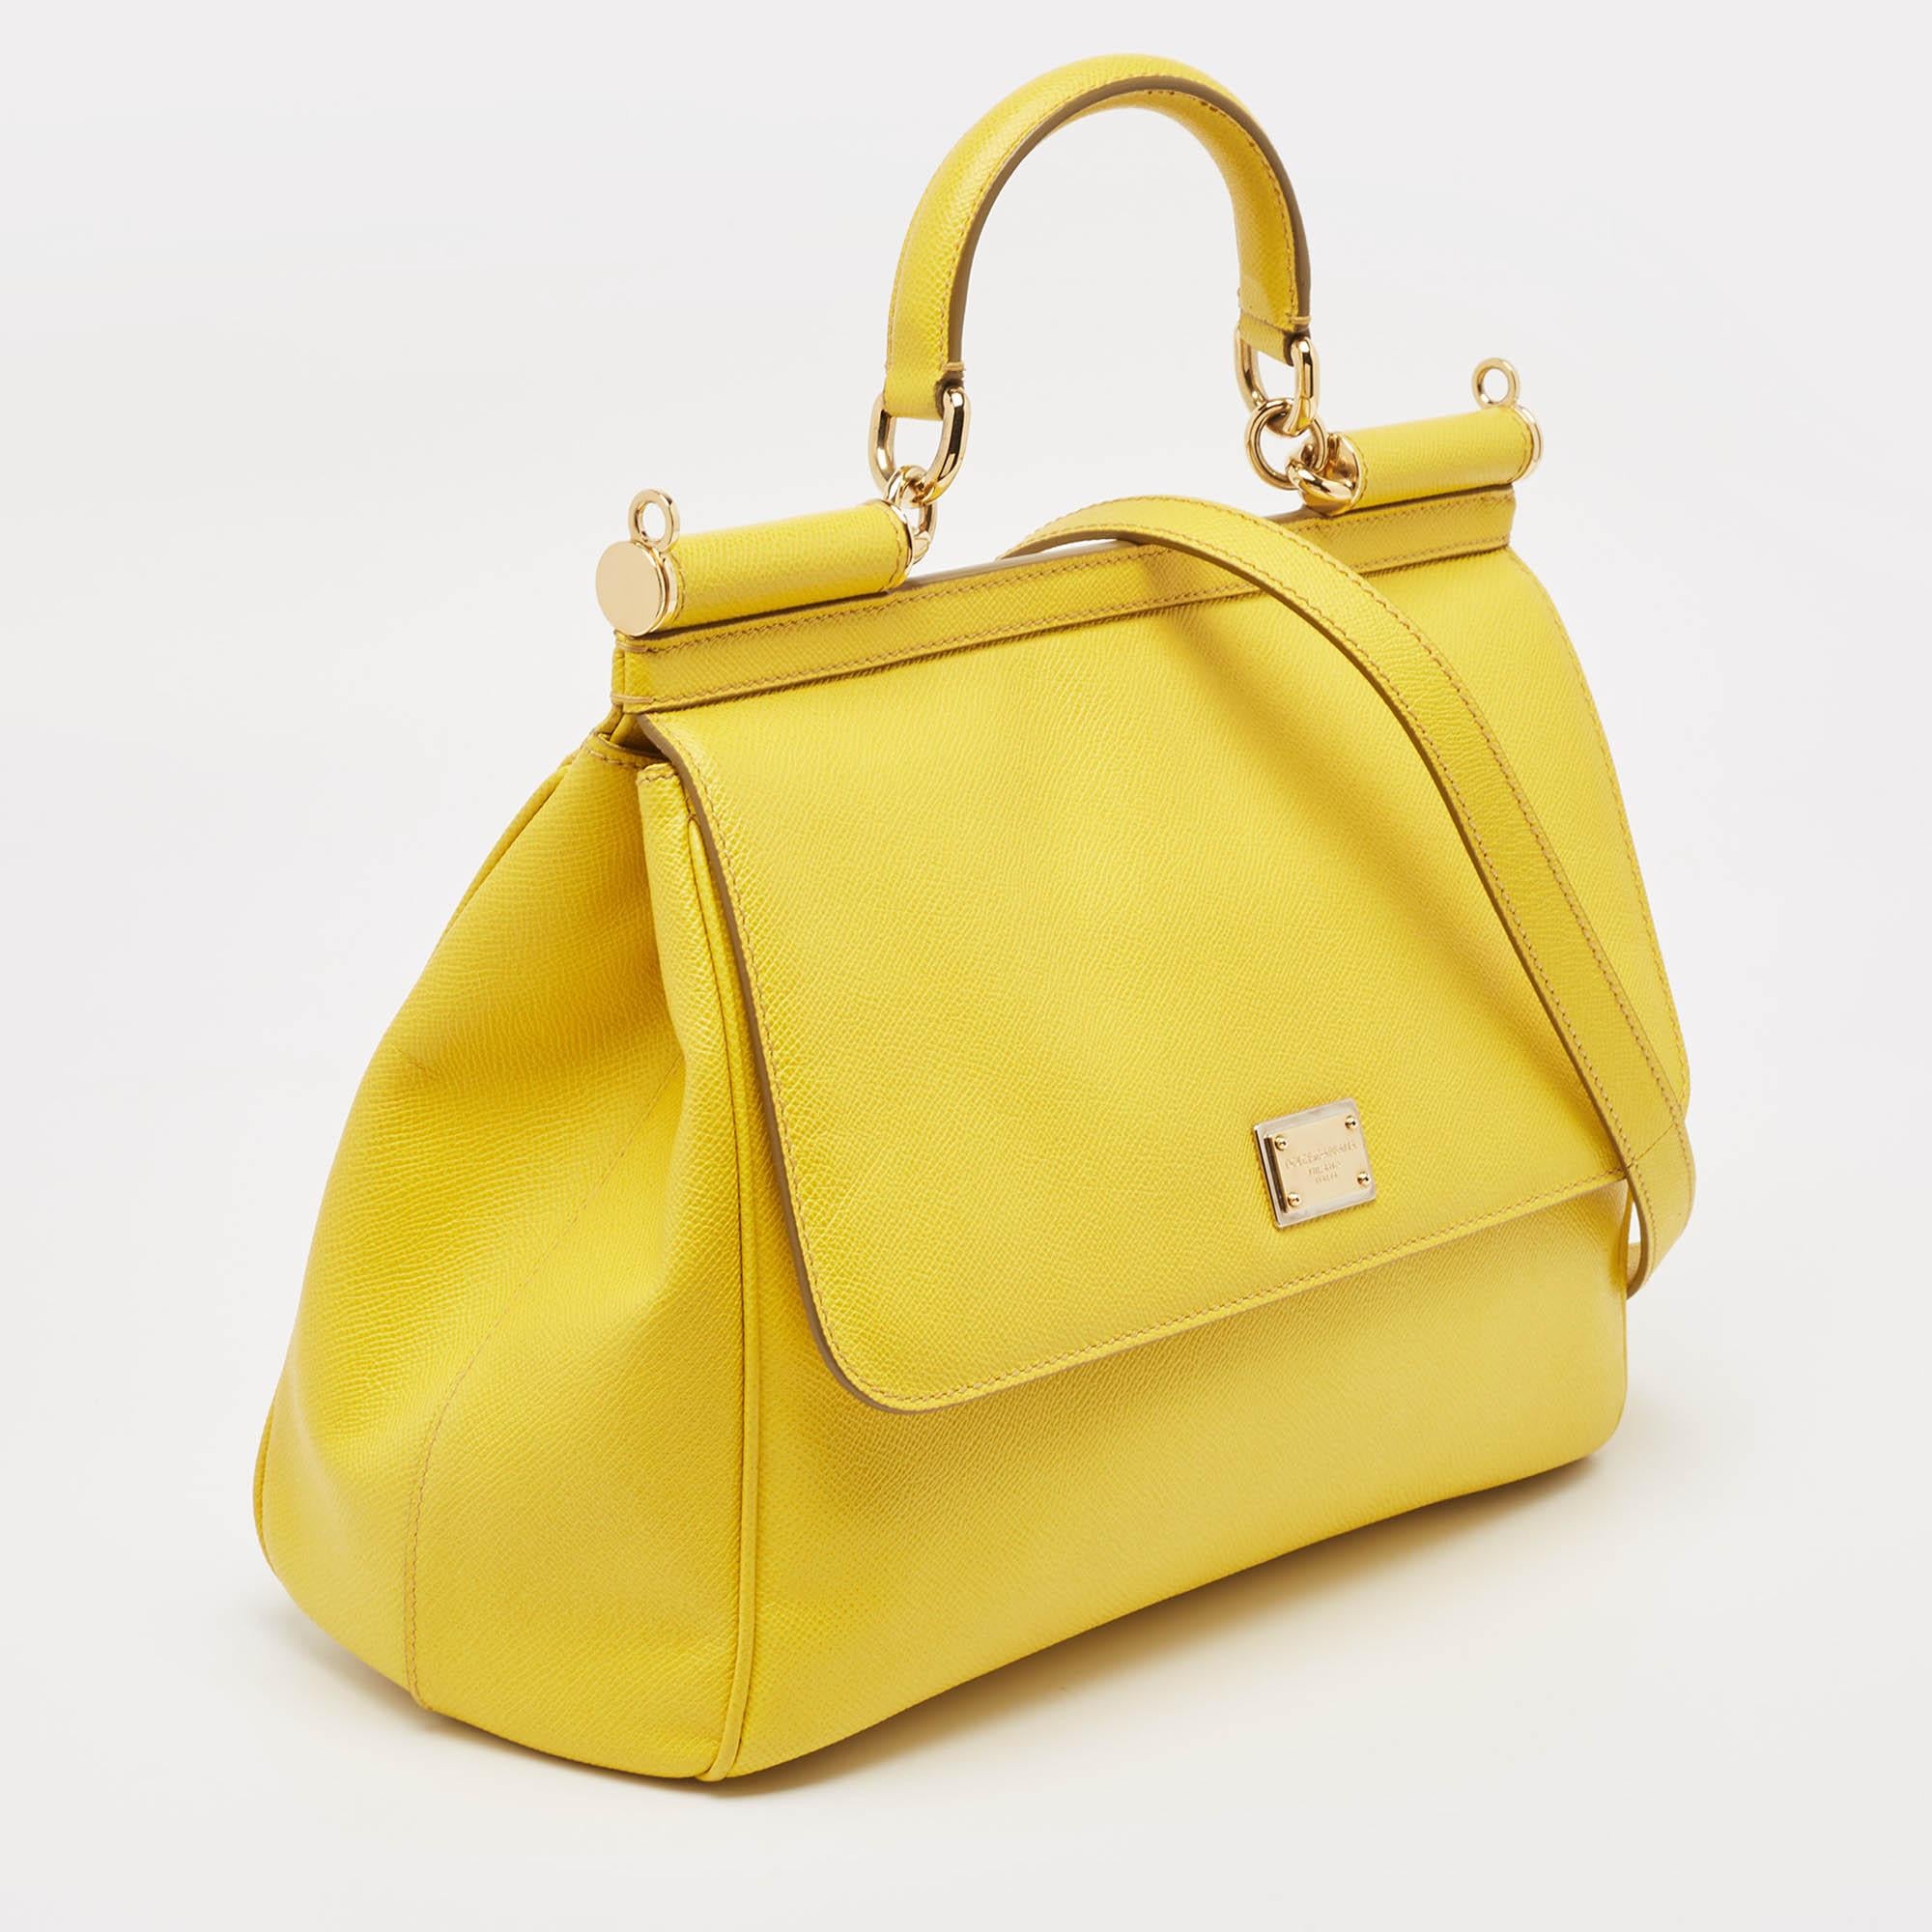 Dolce & Gabbana Yellow Leather Large Miss Sicily Top Handle Bag 2